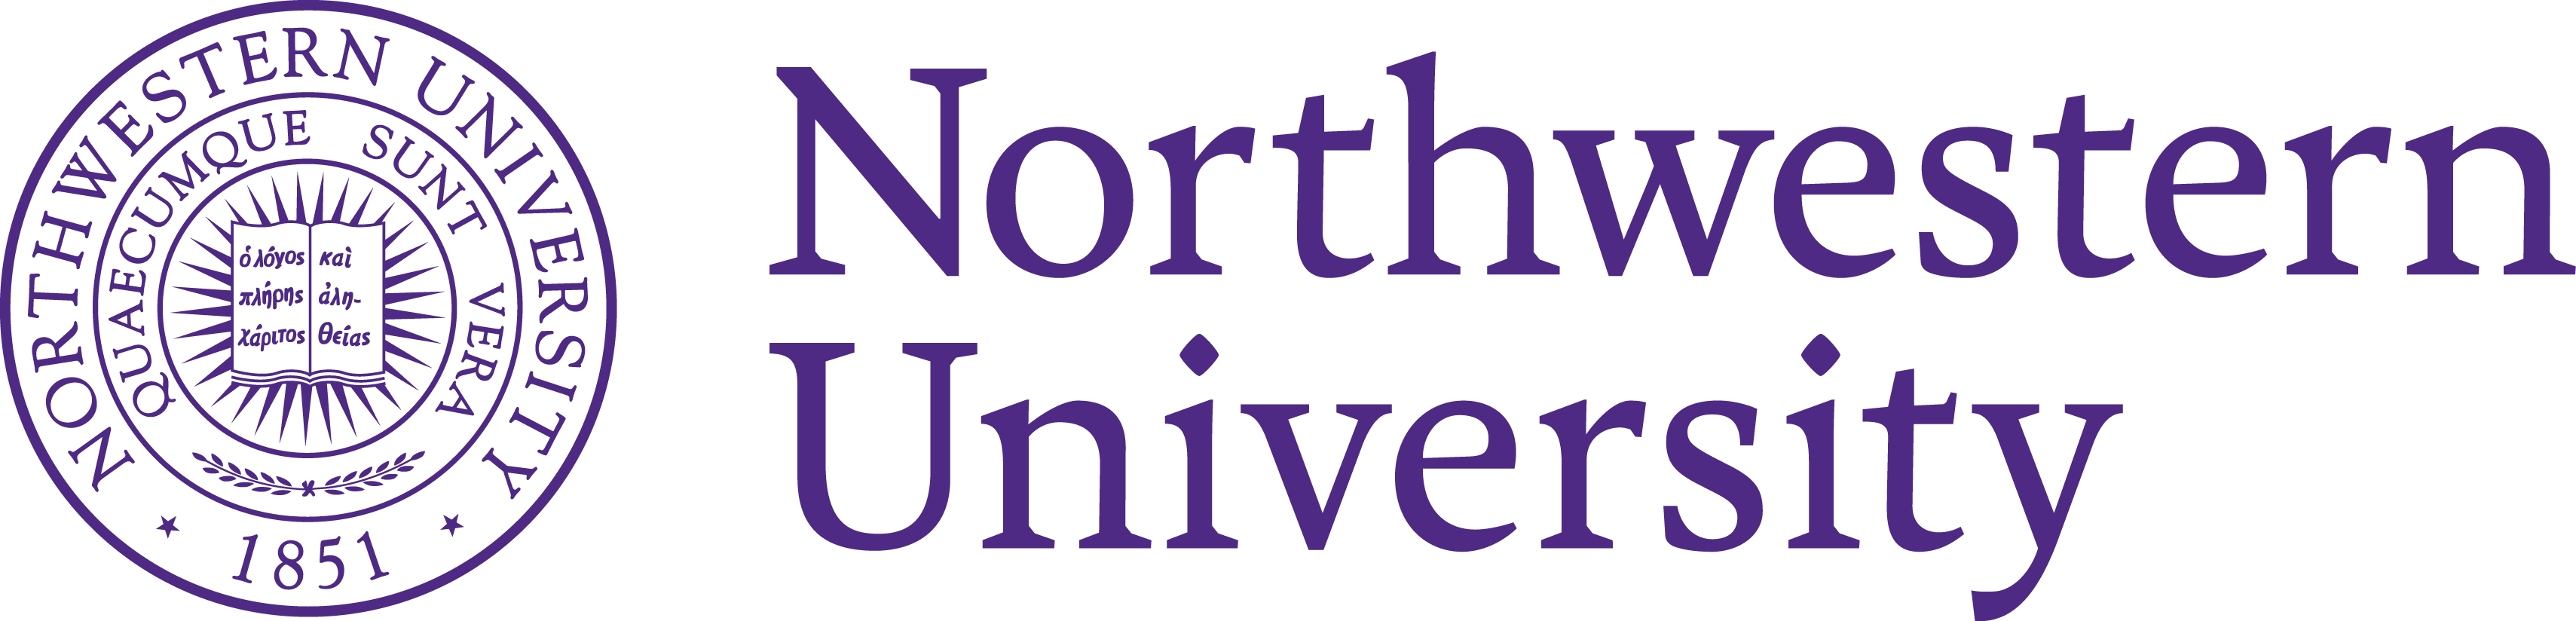 best overseas education consultant in India to study in Northwestern University